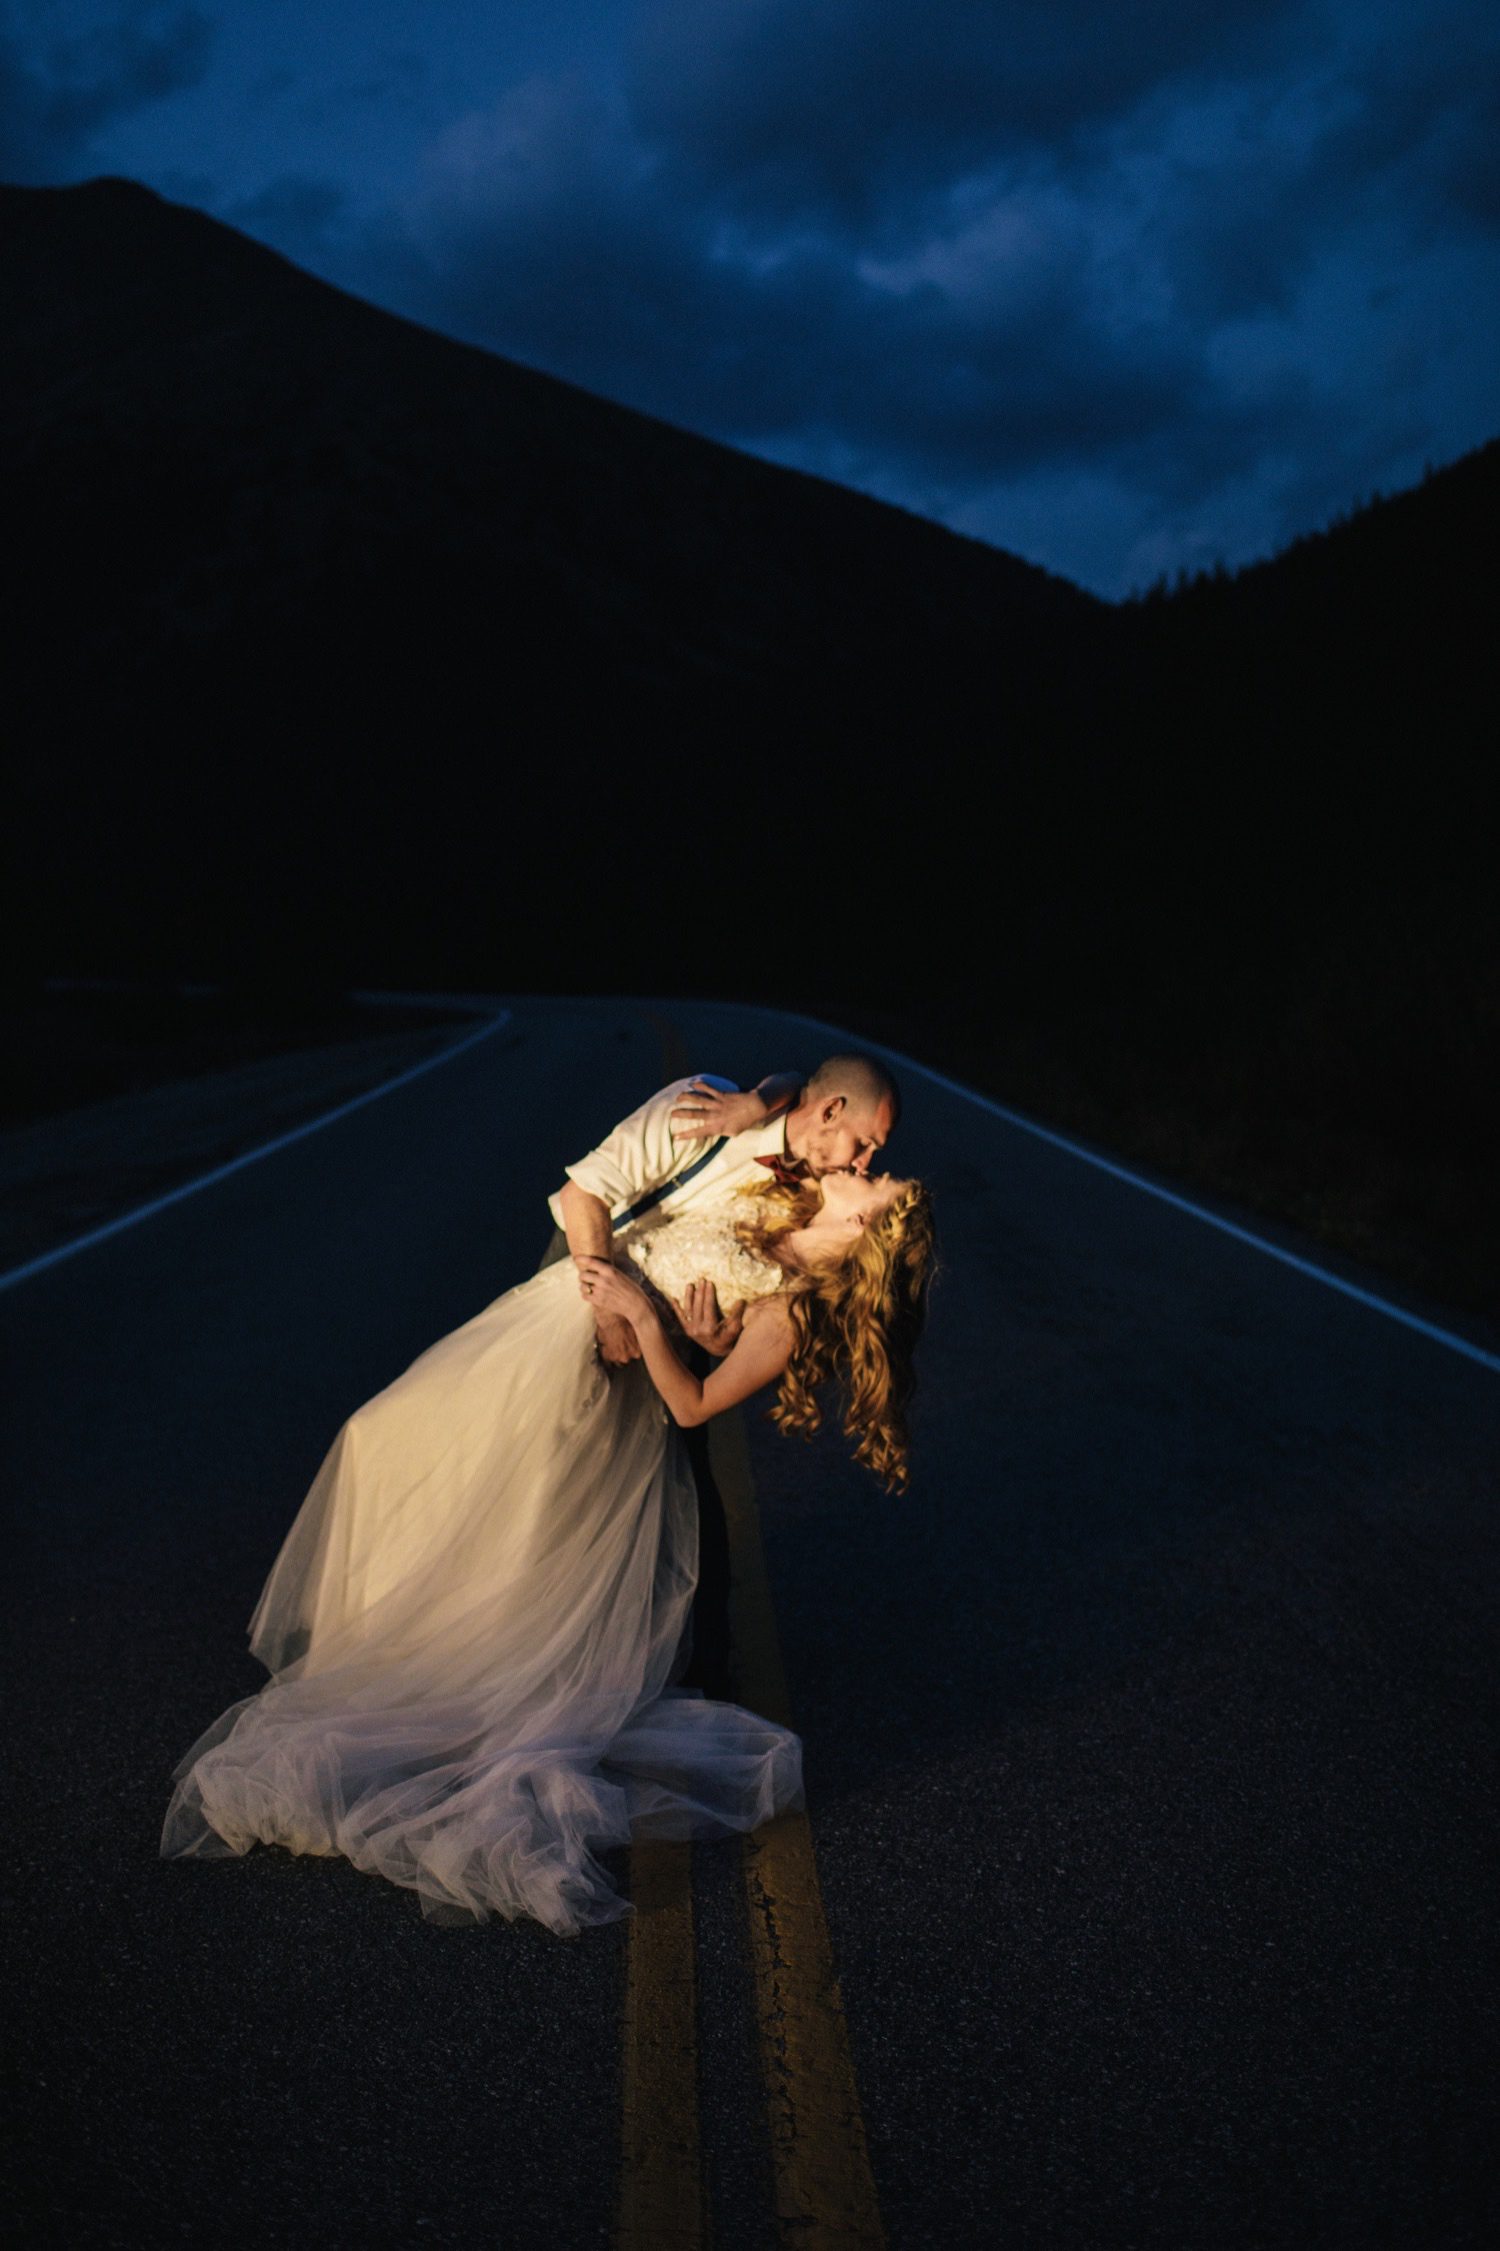 Colorado Elopement, Independence Pass, Twin Lakes, Leadville, Colorado wedding photographer, Colorado wedding photographers, Best Colorado Wedding Photographer, Boulder Wedding Photographer, Longmont Wedding Photographer, Lyons Wedding Photographer, Estes Park Wedding Photographer, Grand Lake Wedding Photographer, Vail Wedding Photographer, Breckenridge Wedding Photographer, Keystone Wedding Photographer, Dillon Wedding Photographer, Colorado Mountain Wedding Photographer